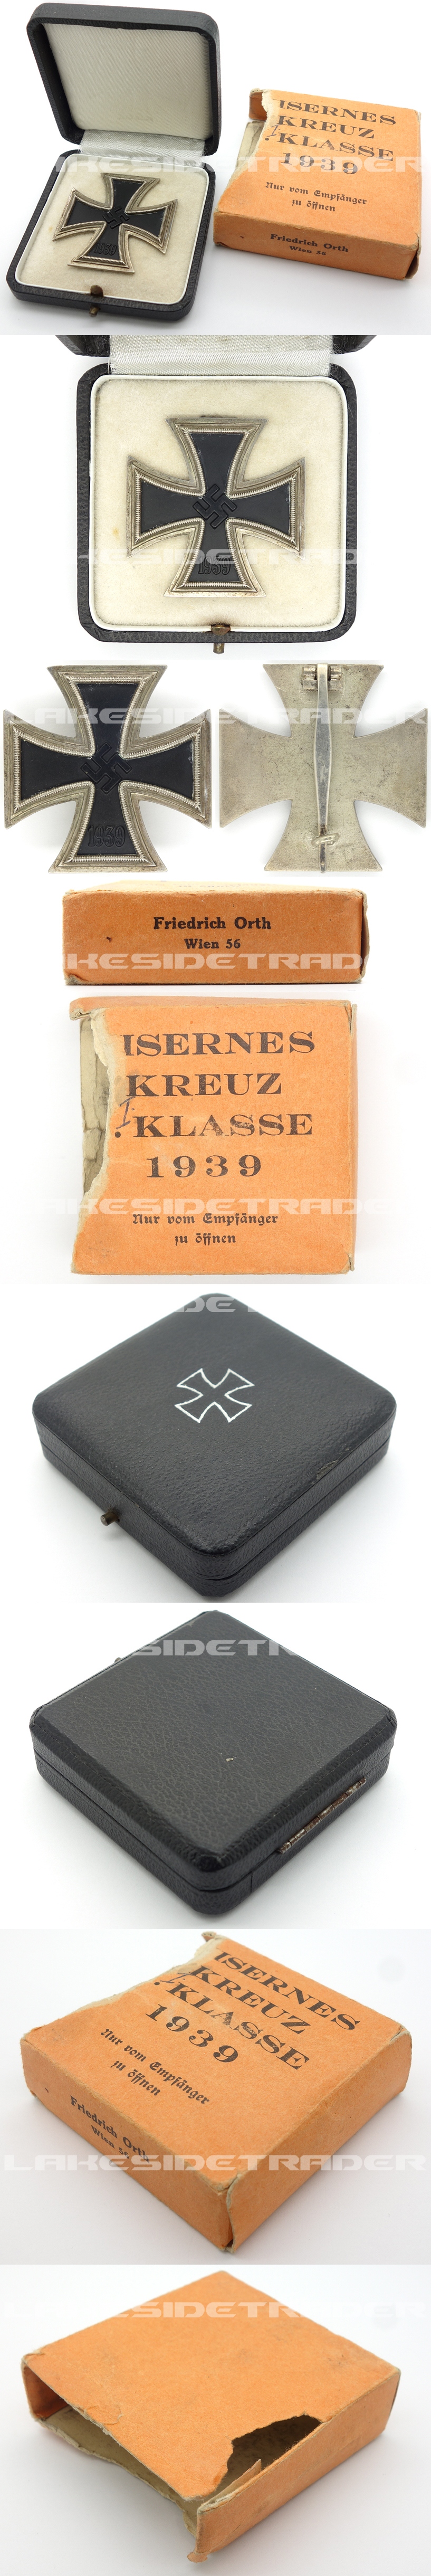 Issue Carton - Cased 1st Class Iron Cross by F. Orth